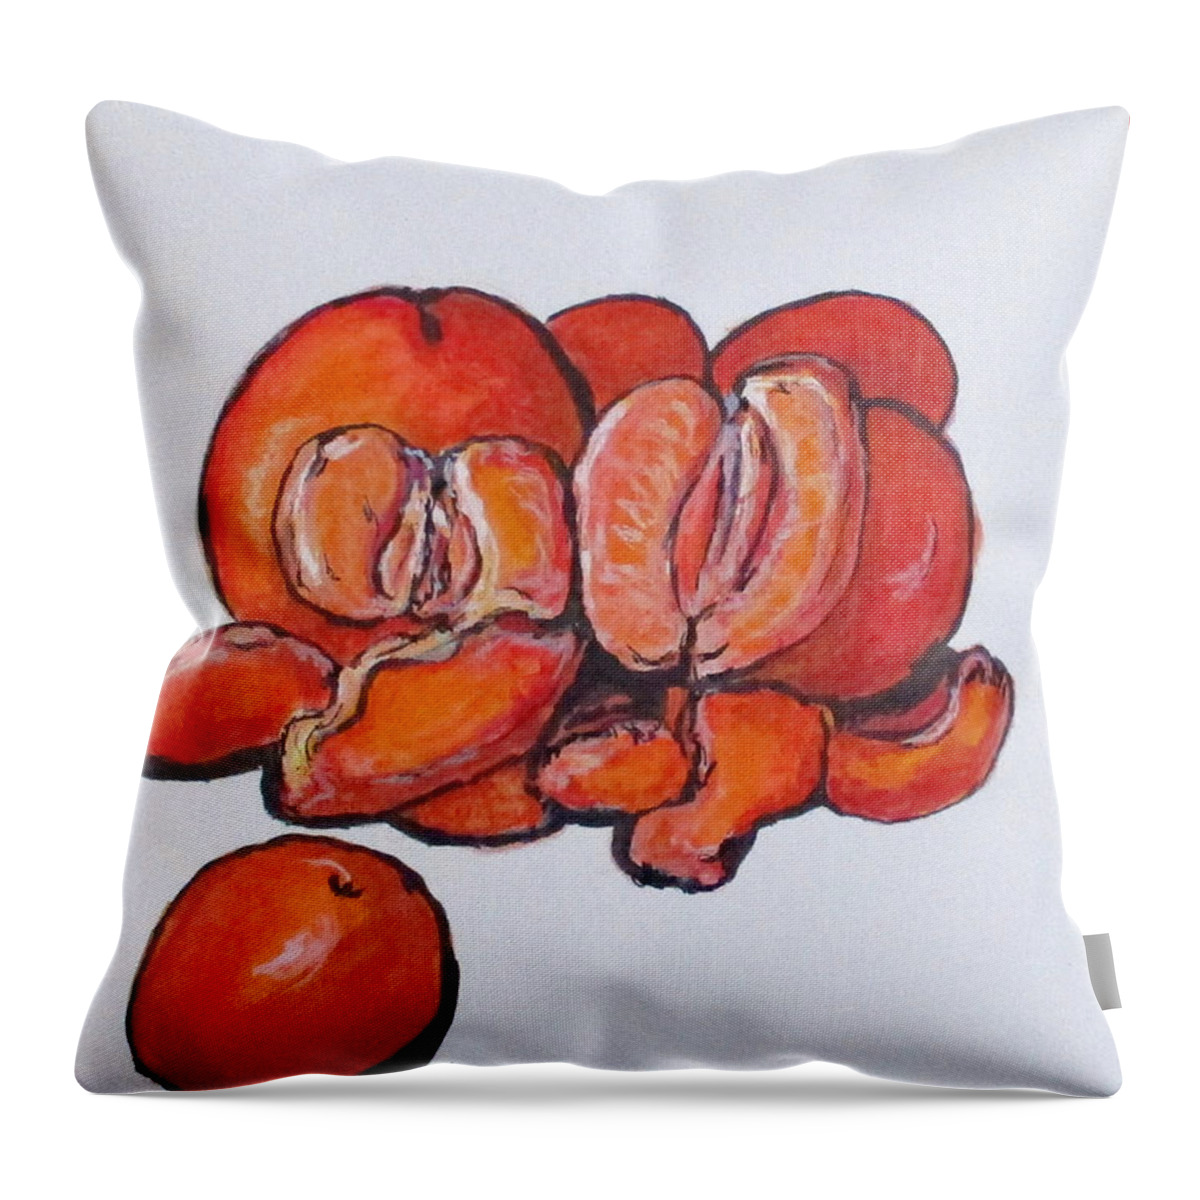 Fruit Throw Pillow featuring the painting juicy Tangerines by Clyde J Kell